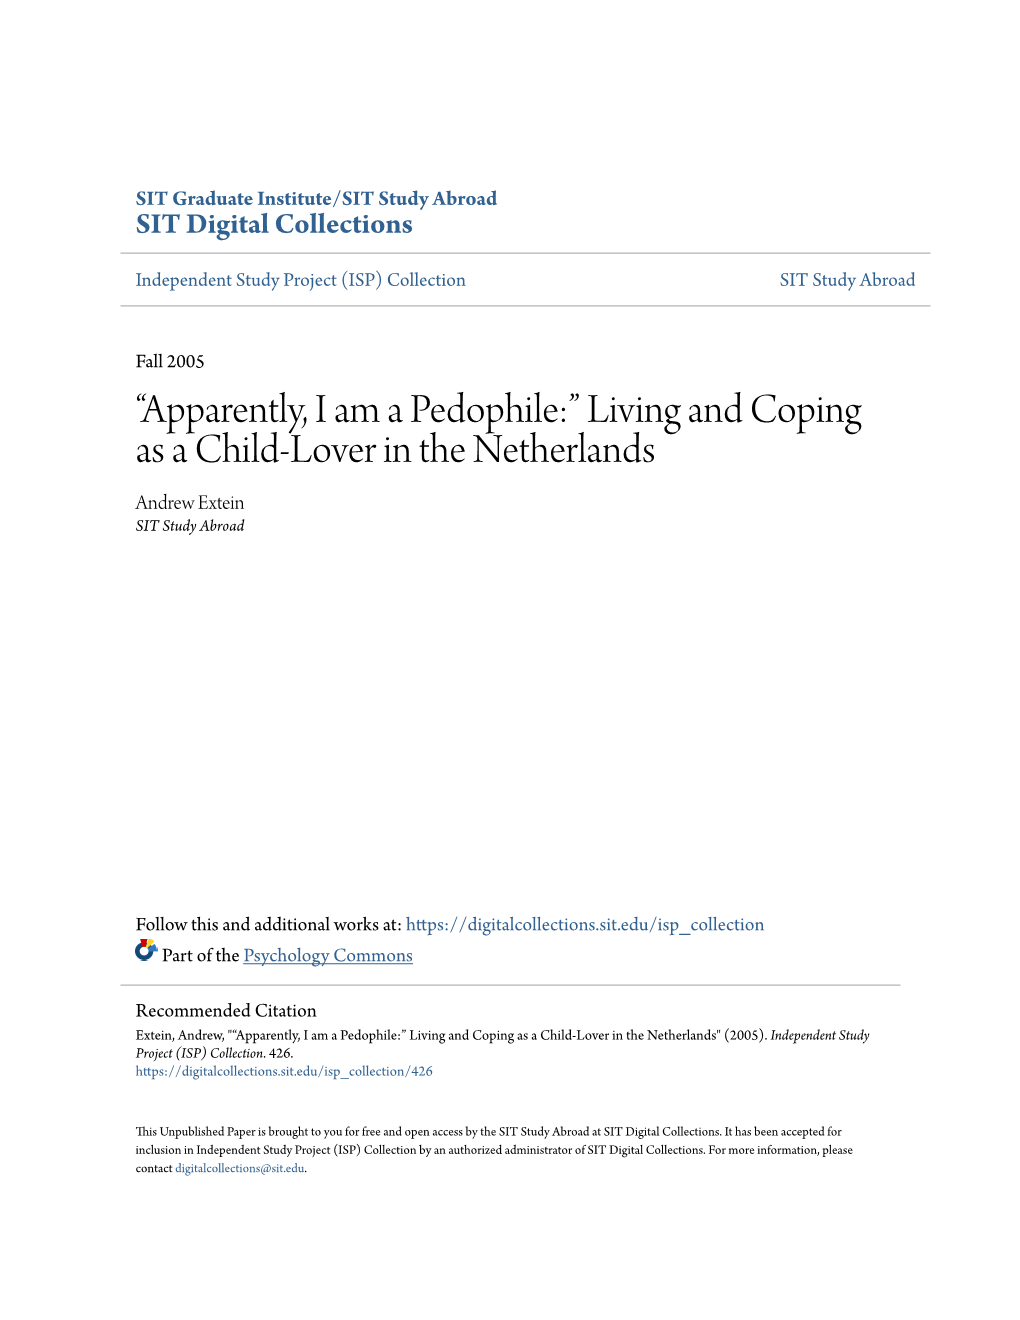 “Apparently, I Am a Pedophile:” Living and Coping As a Child-Lover in the Netherlands Andrew Extein SIT Study Abroad